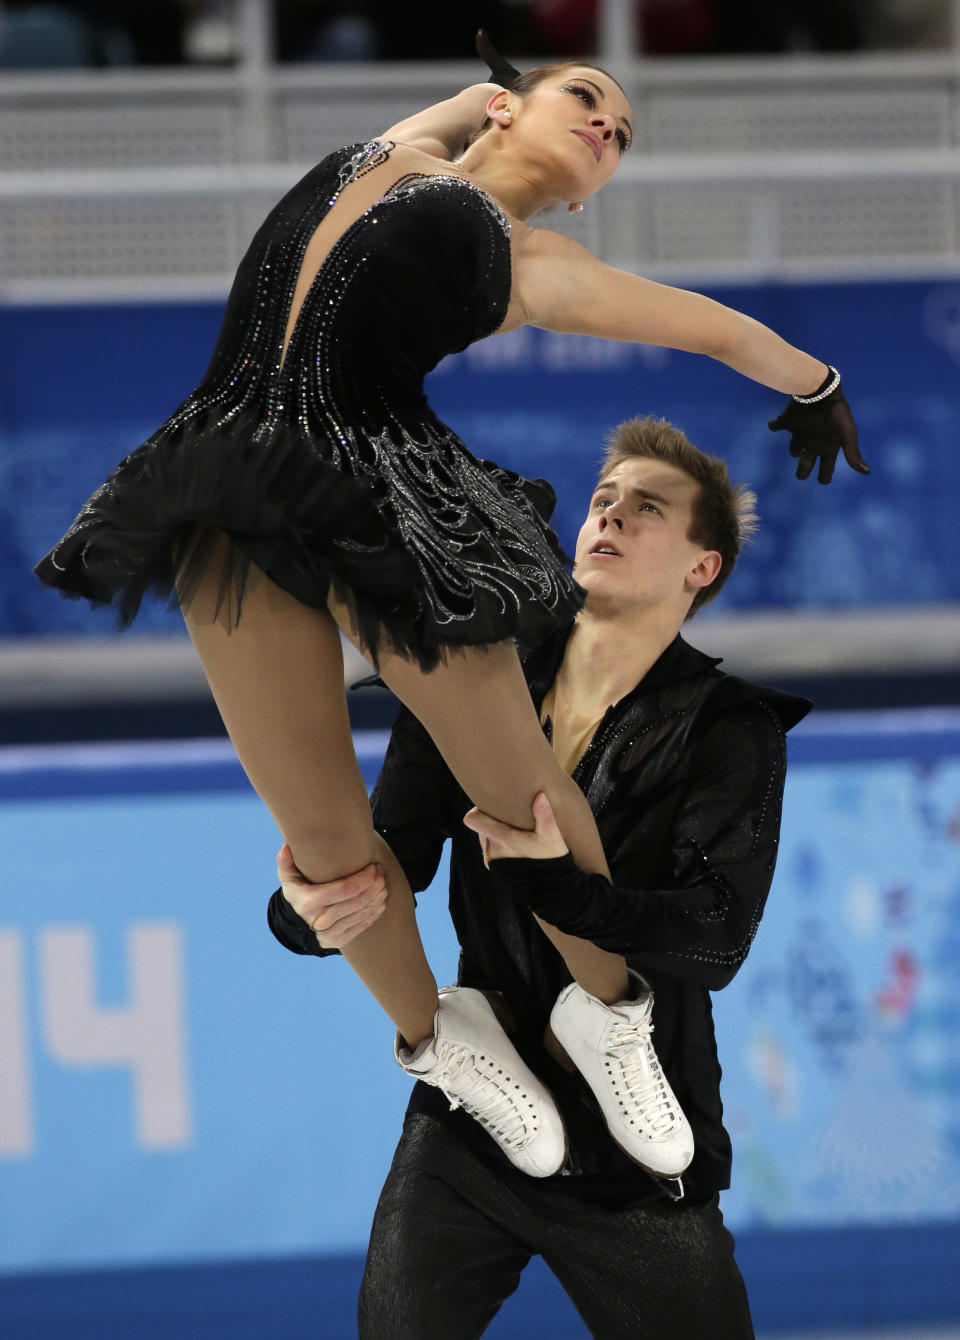 Elena Ilinykh and Nikita Katsalapov of Russia compete in the team free ice dance figure skating competition at the Iceberg Skating Palace during the 2014 Winter Olympics, Sunday, Feb. 9, 2014, in Sochi, Russia. (AP Photo/Bernat Armangue)